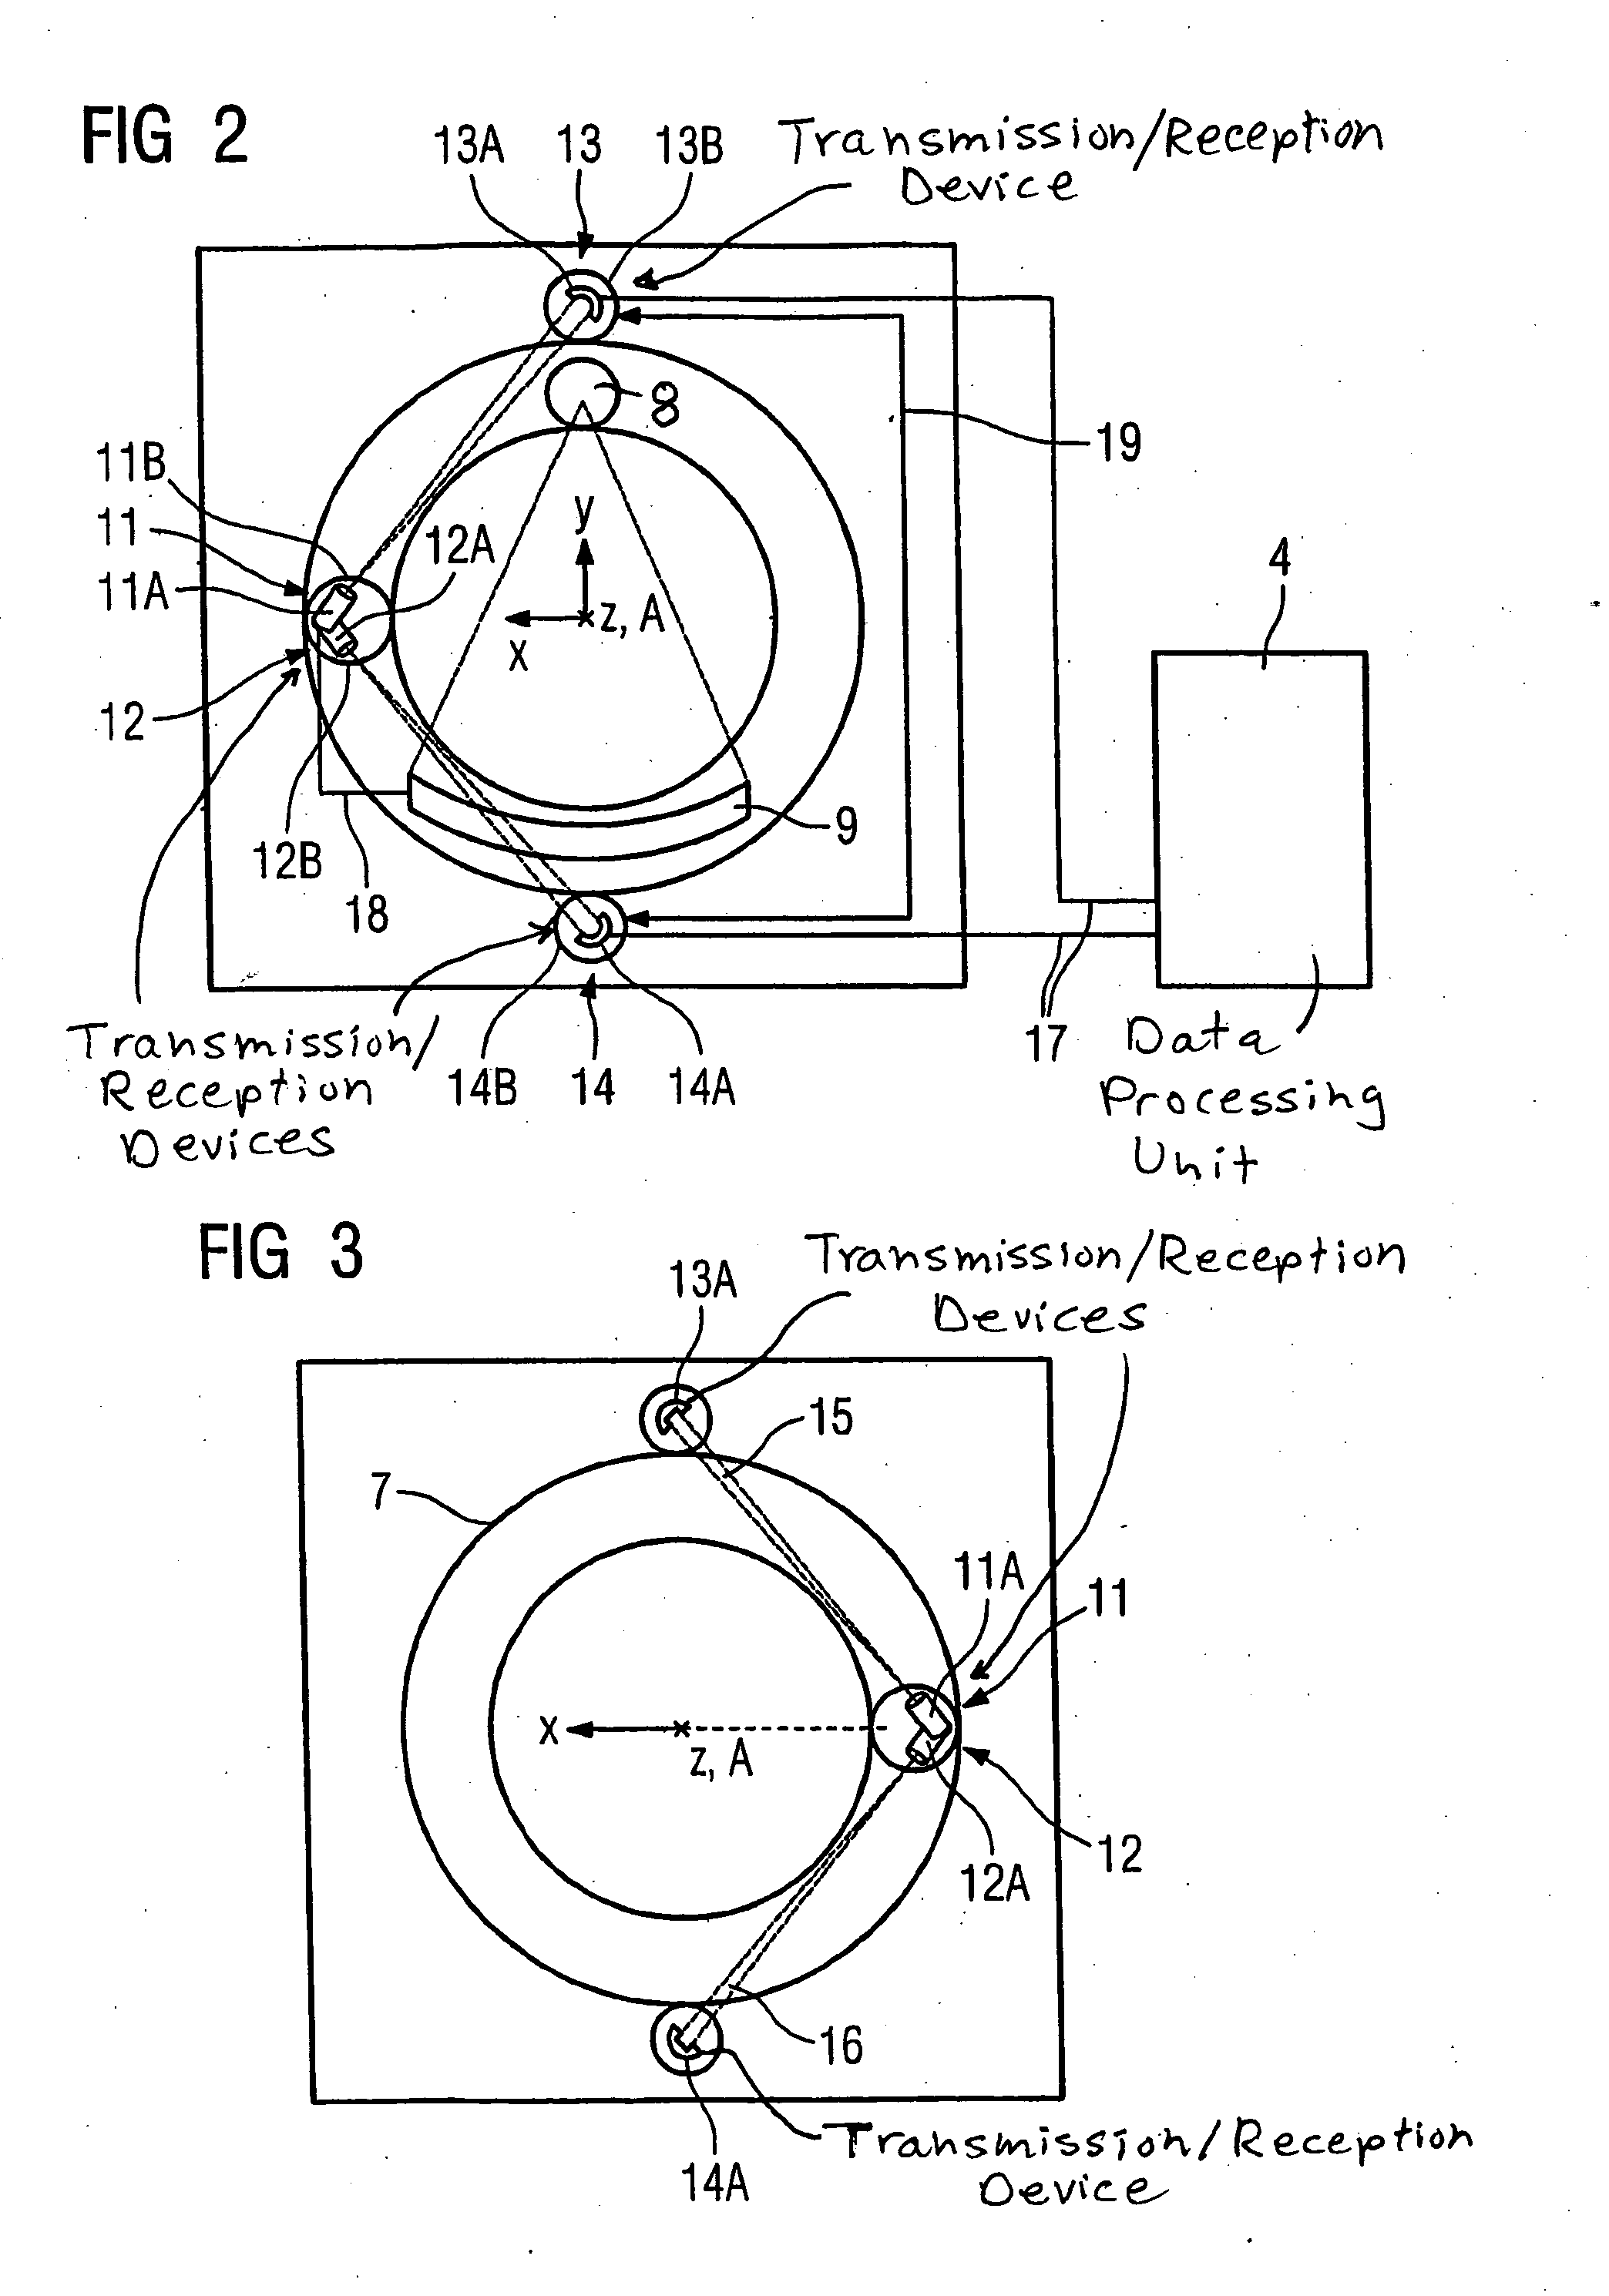 Device for Contact-Free Transmission of Signals and Measured Data in a Computed Tomography Apparatus